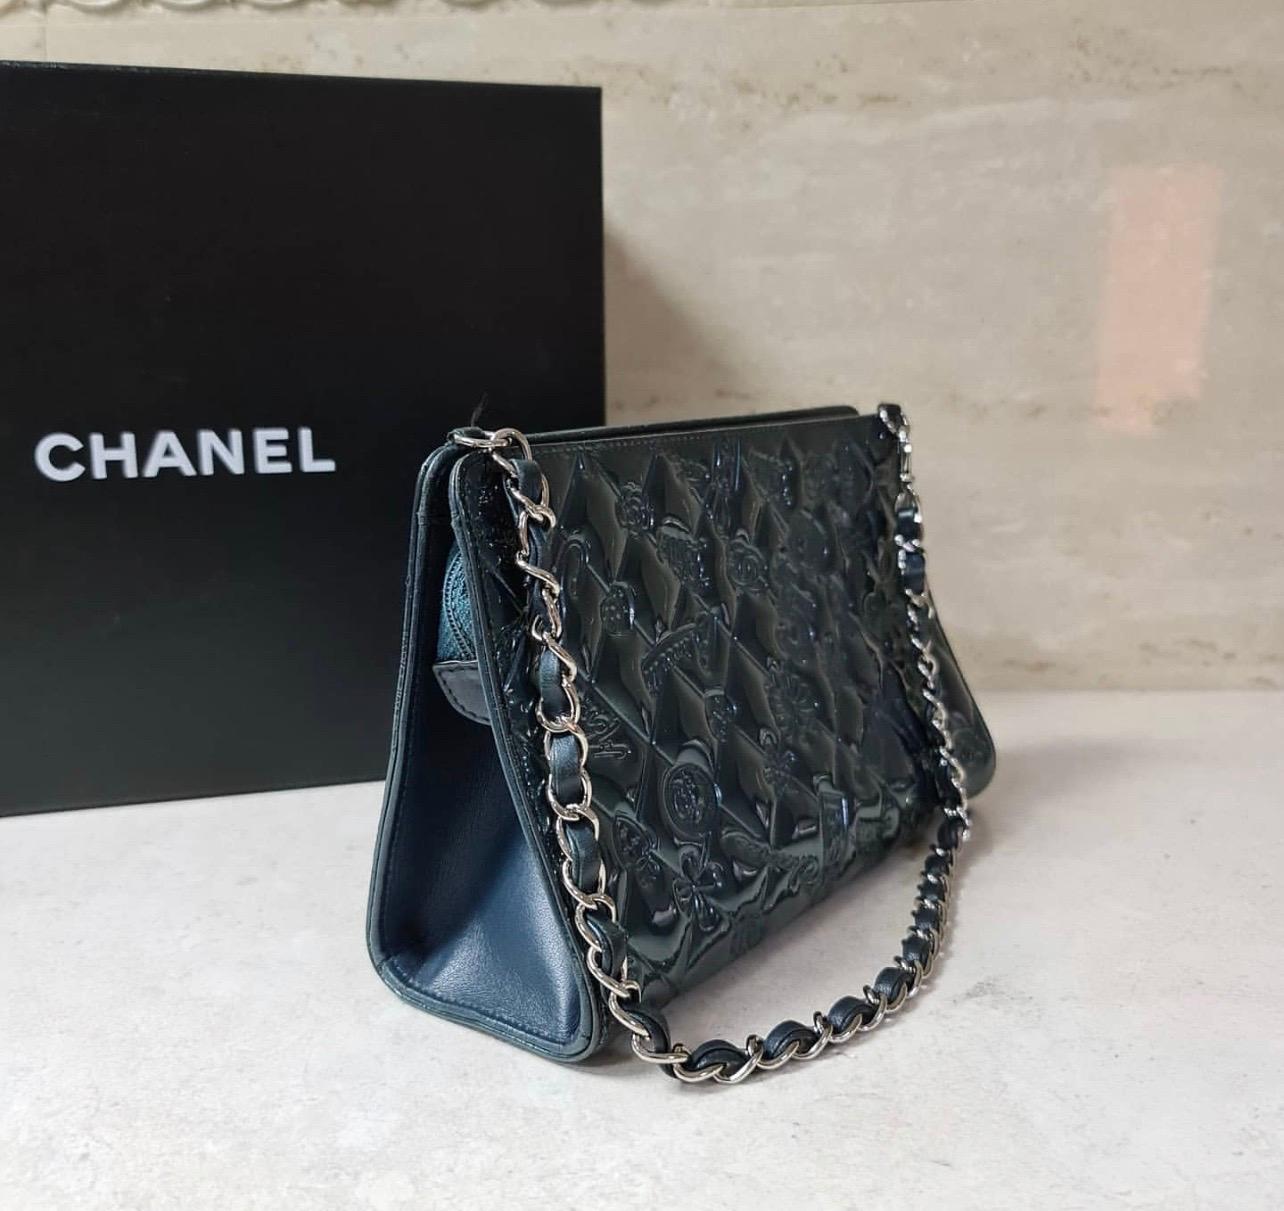 Special Edition Chanel No 5 Mademoiselle Monaco Biarritz Paris Patent Purse.
Rare teal color.


23*14 cm

Very good condition.  Have some dirty at the lining corner.

No original packaging.


For buyers from EU we can provide shipping from Poland.